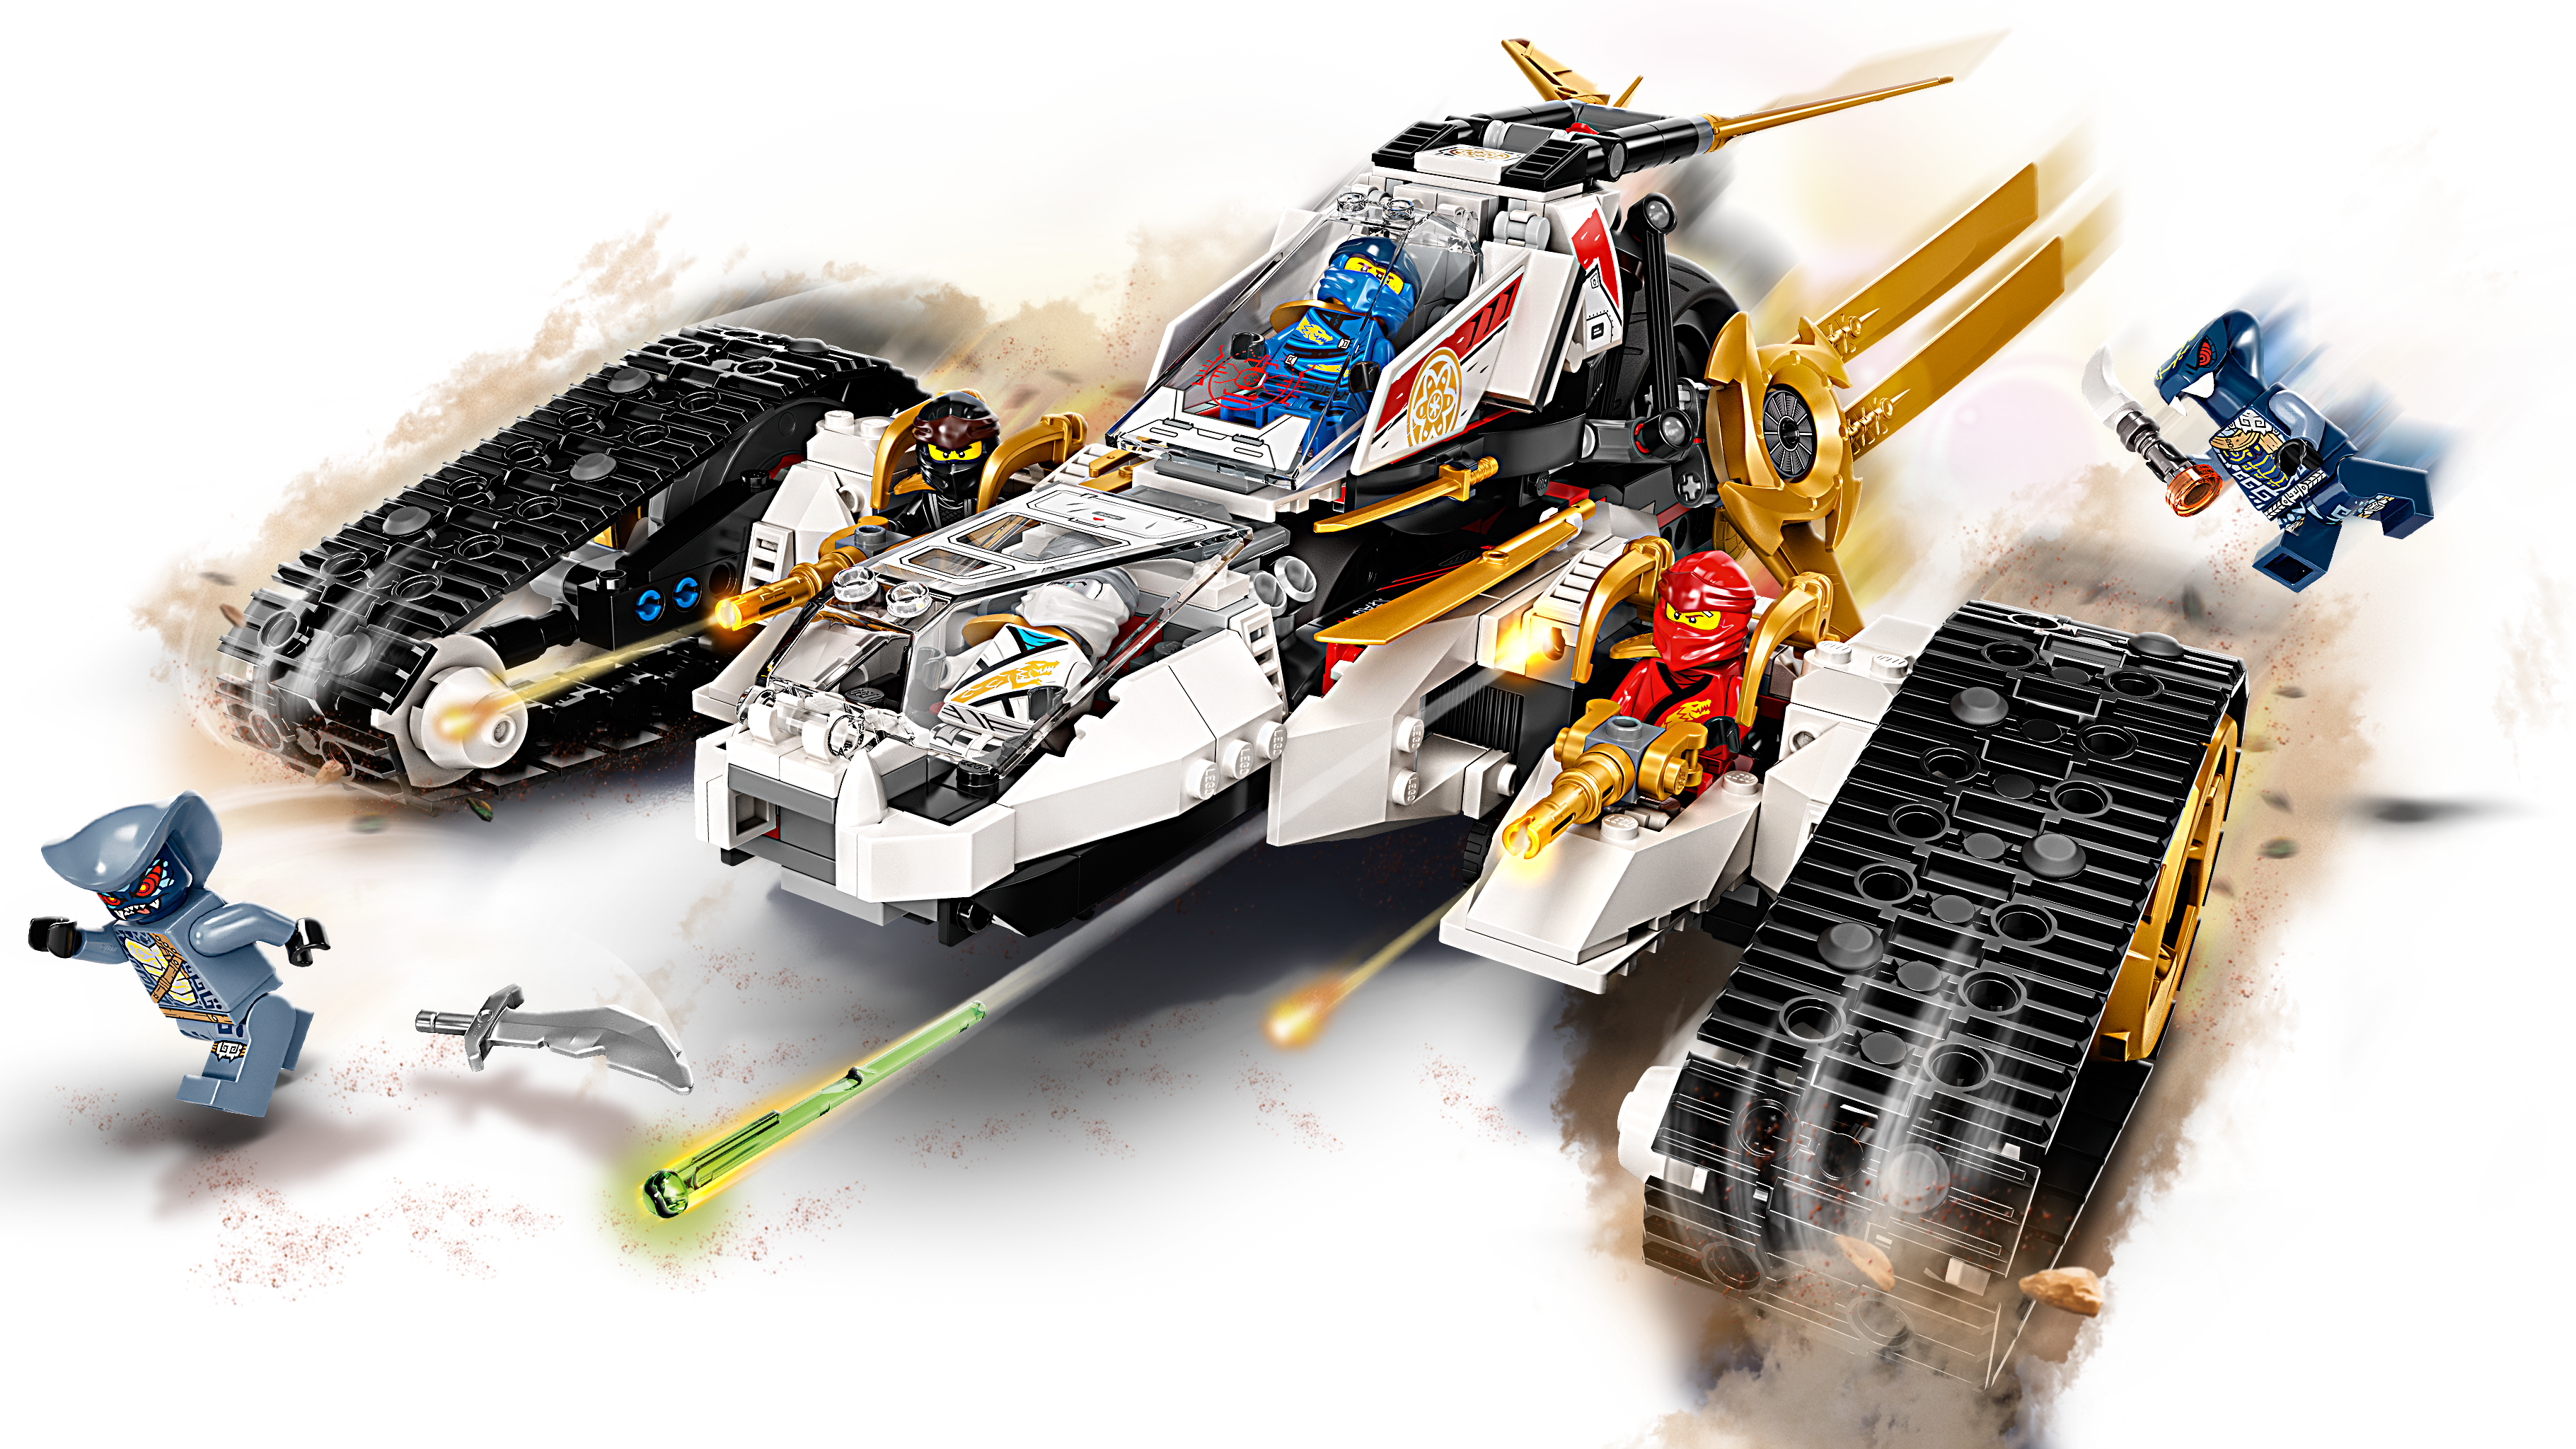  LEGO NINJAGO Legacy Ultra Sonic Raider 71739 Ninja Toy Building  Kit with a Buildable Plane and Motorcycle Toy, Featuring 7 Collectible  Minifigures : Toys & Games